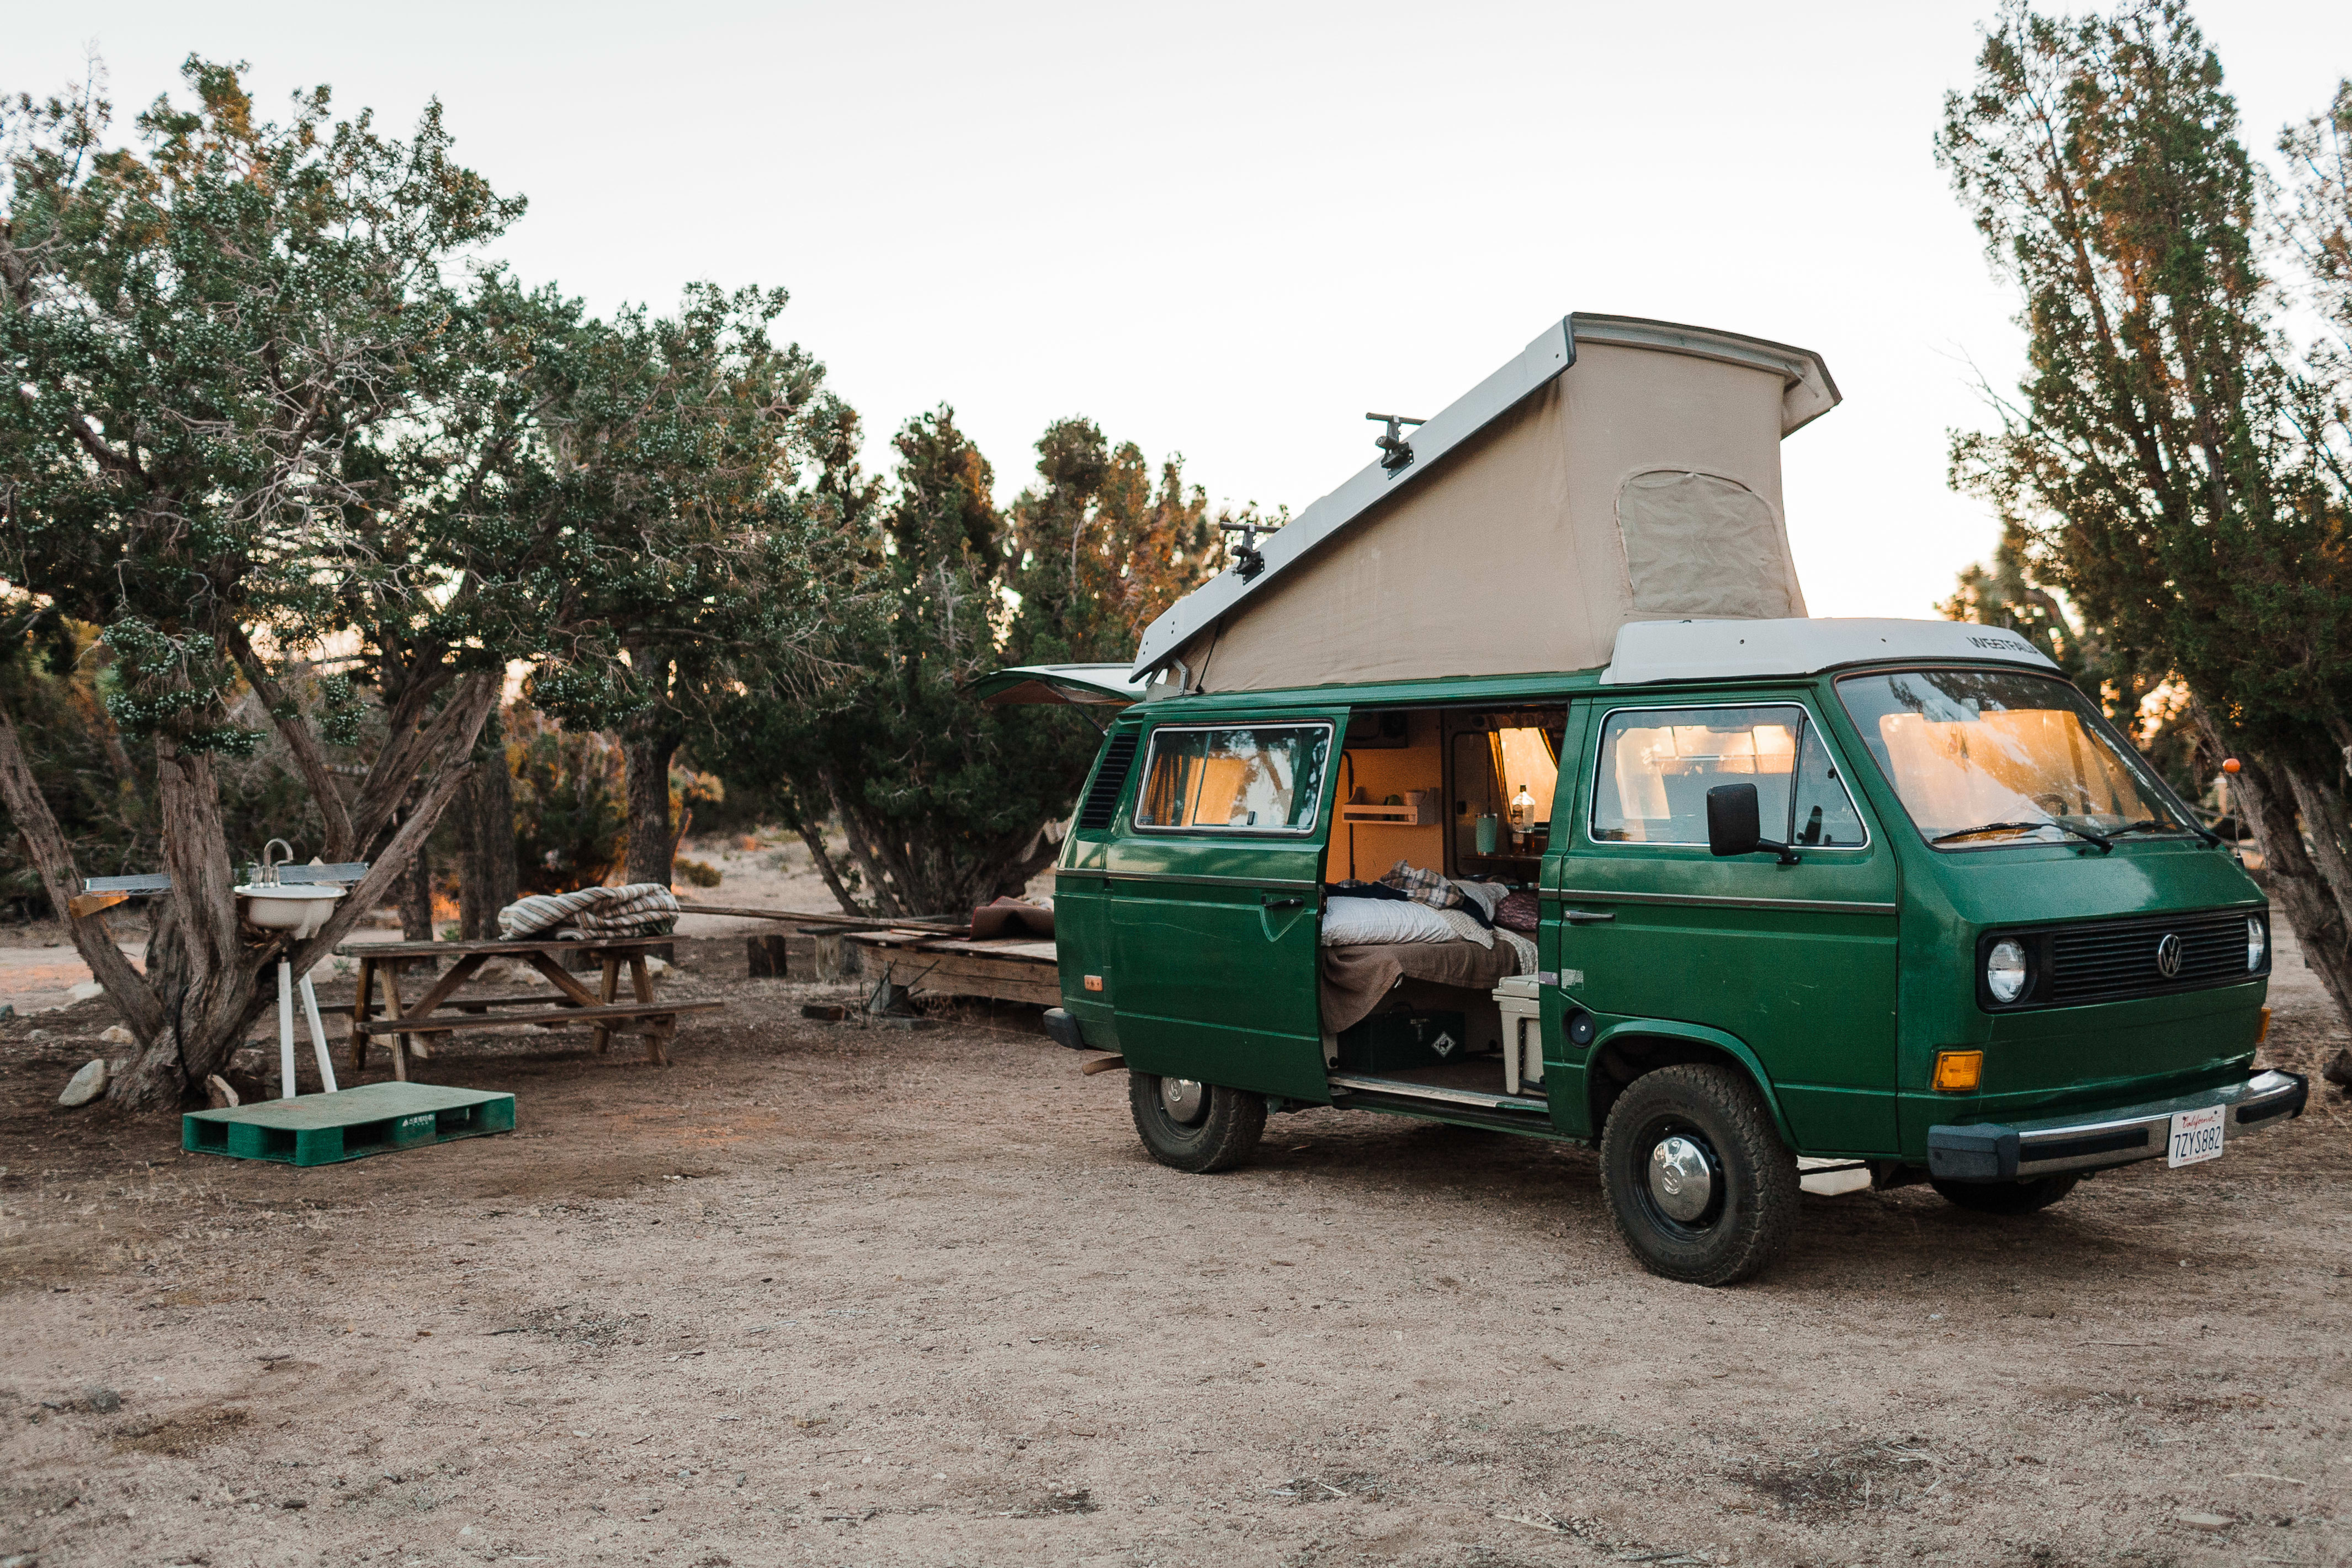 How much does it cost to camp or vanlife in Joshua Tree